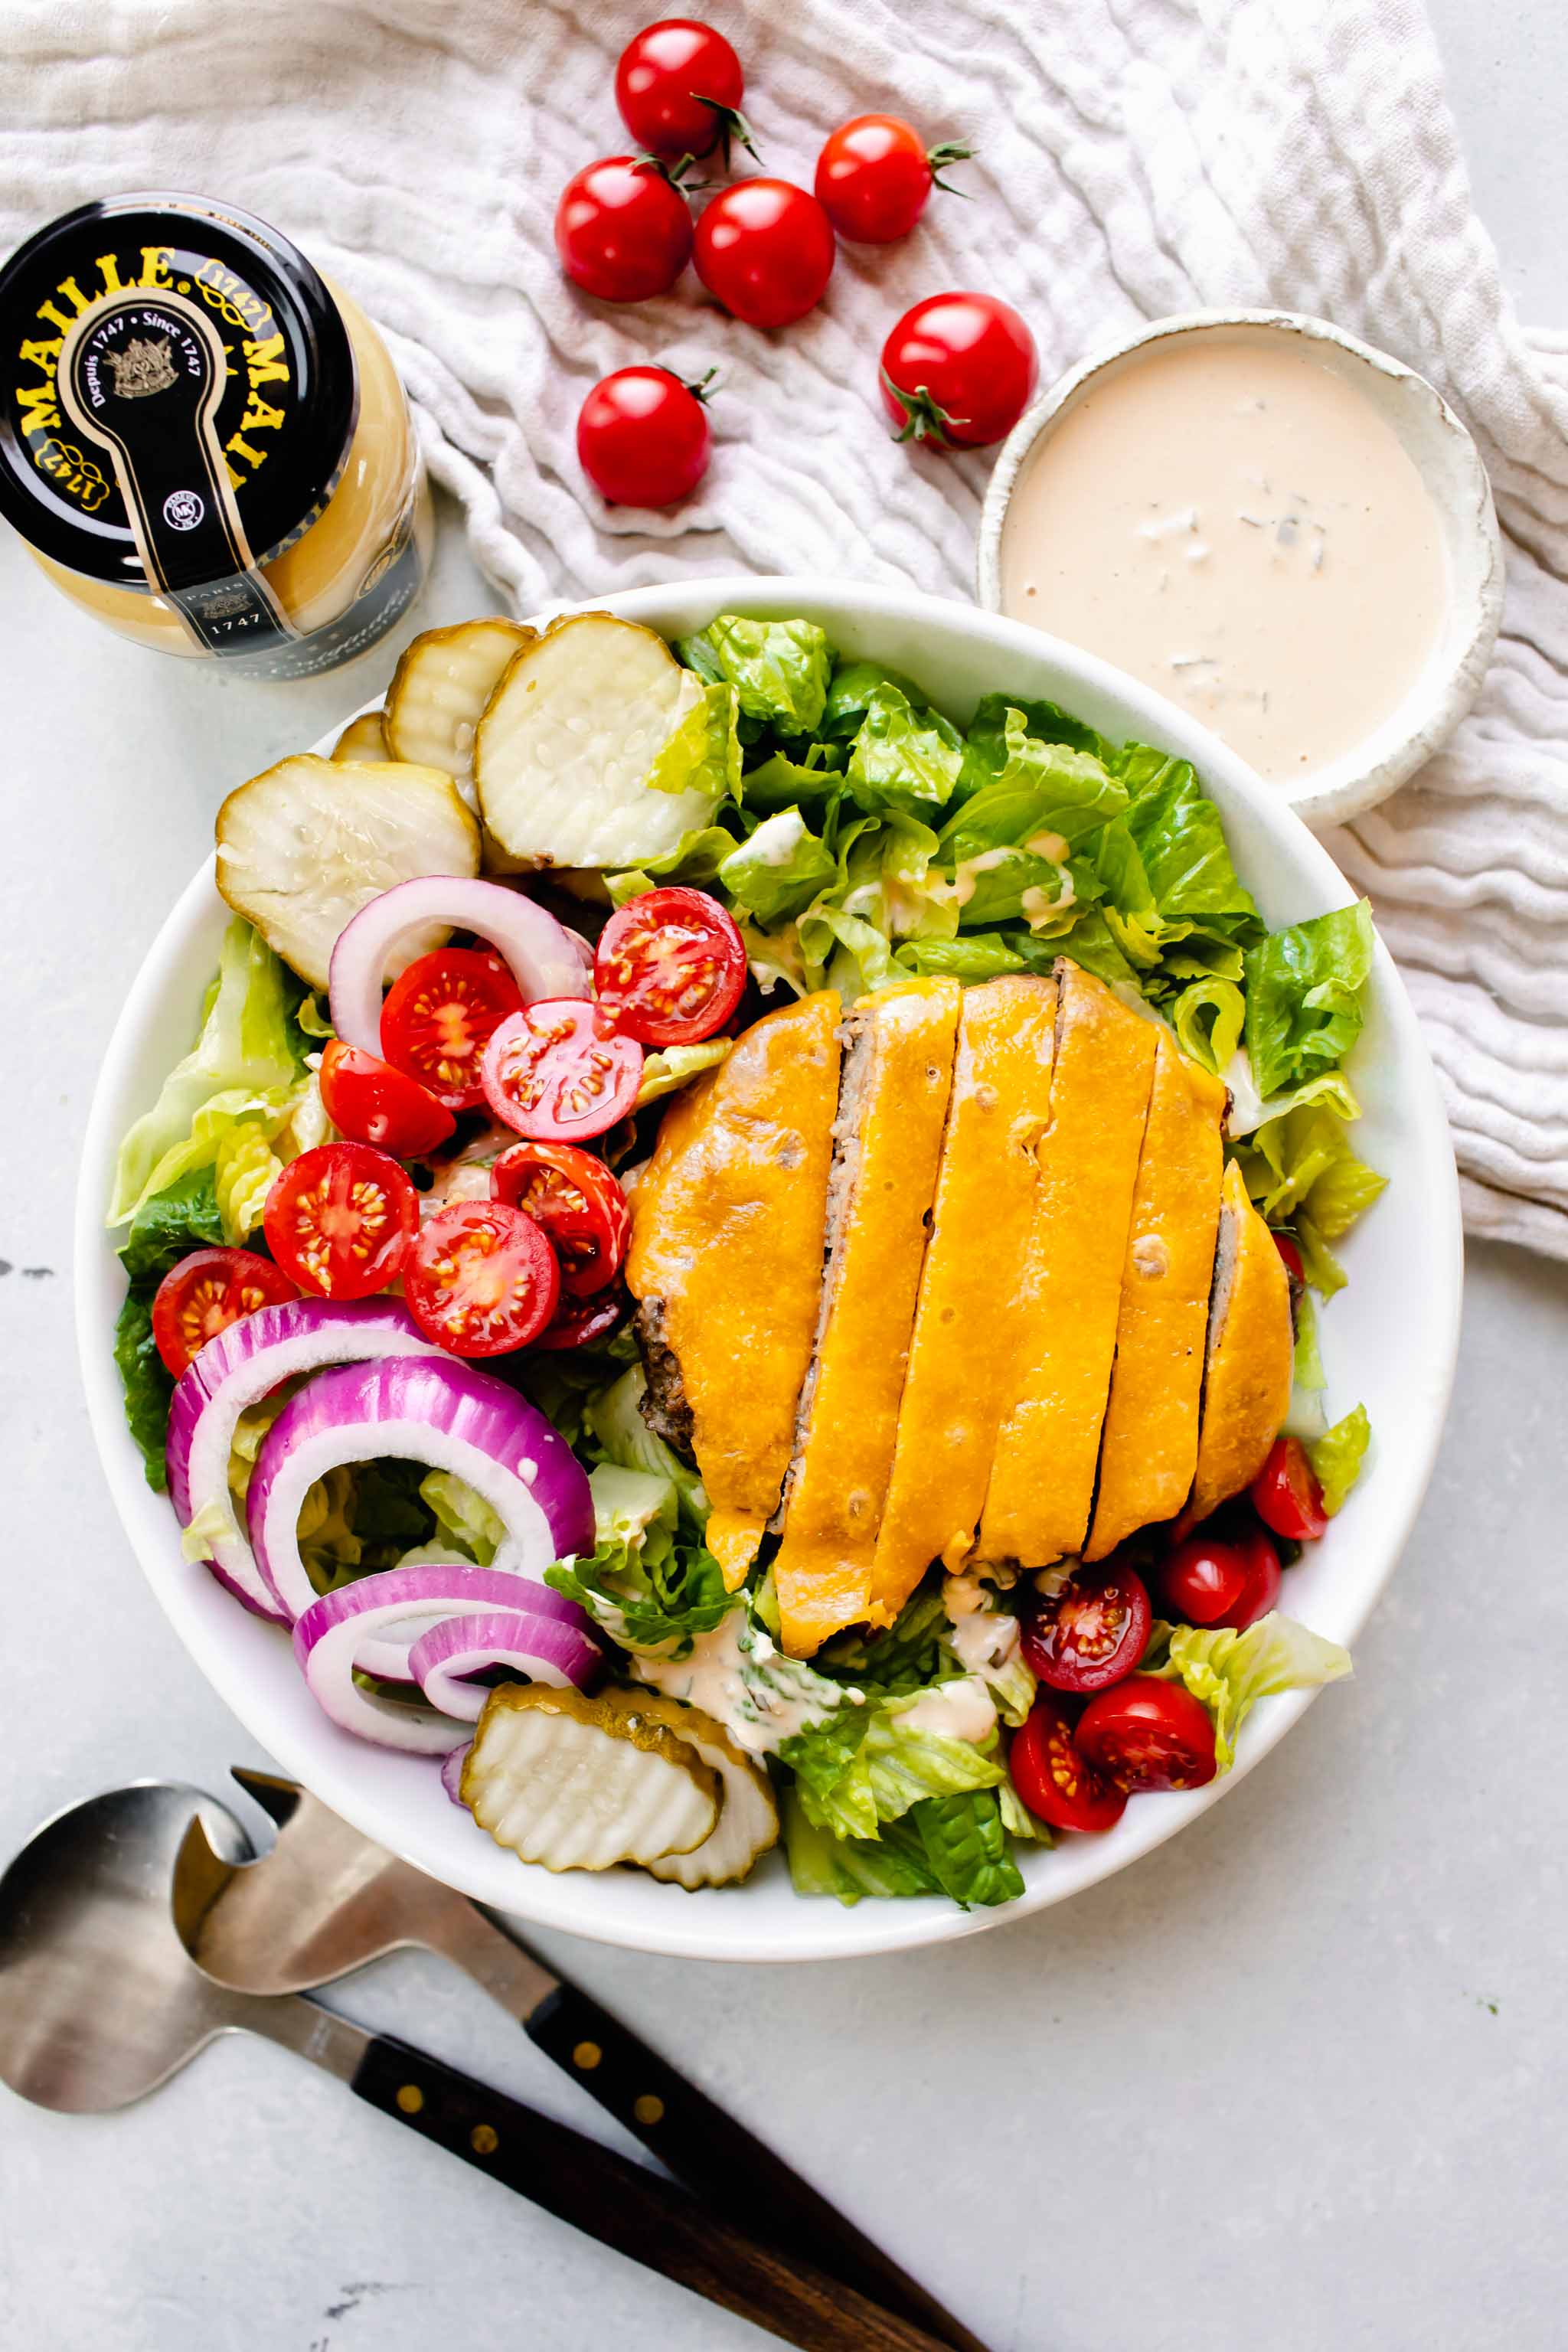 Overhead shot of bowl of cheeseburger salad next to jar of mustard and bowl of special sauce.